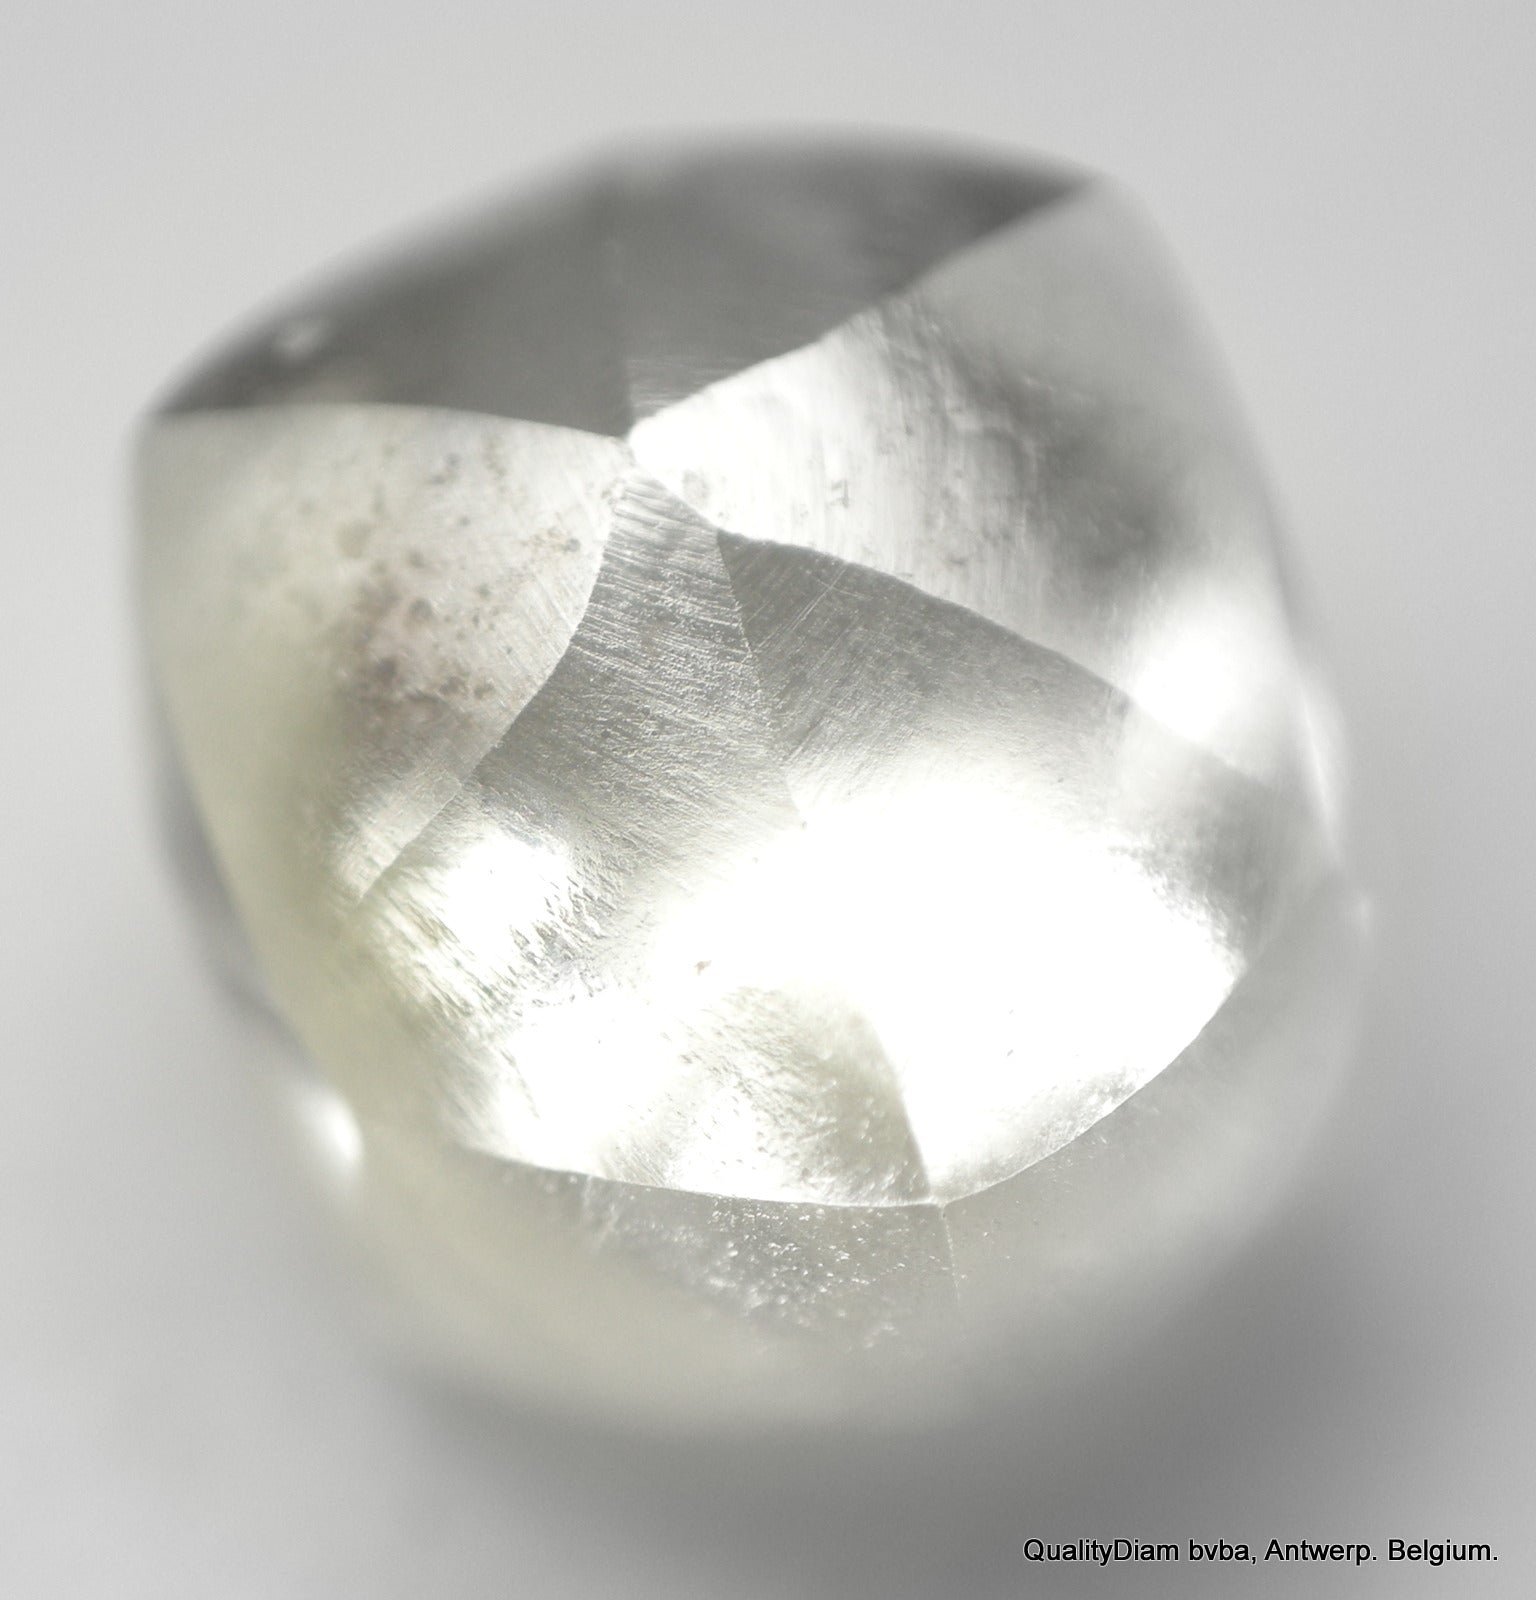 0.93 Carat Freshly mined Rough Diamond in Mackle shape with Unusual Brilliance